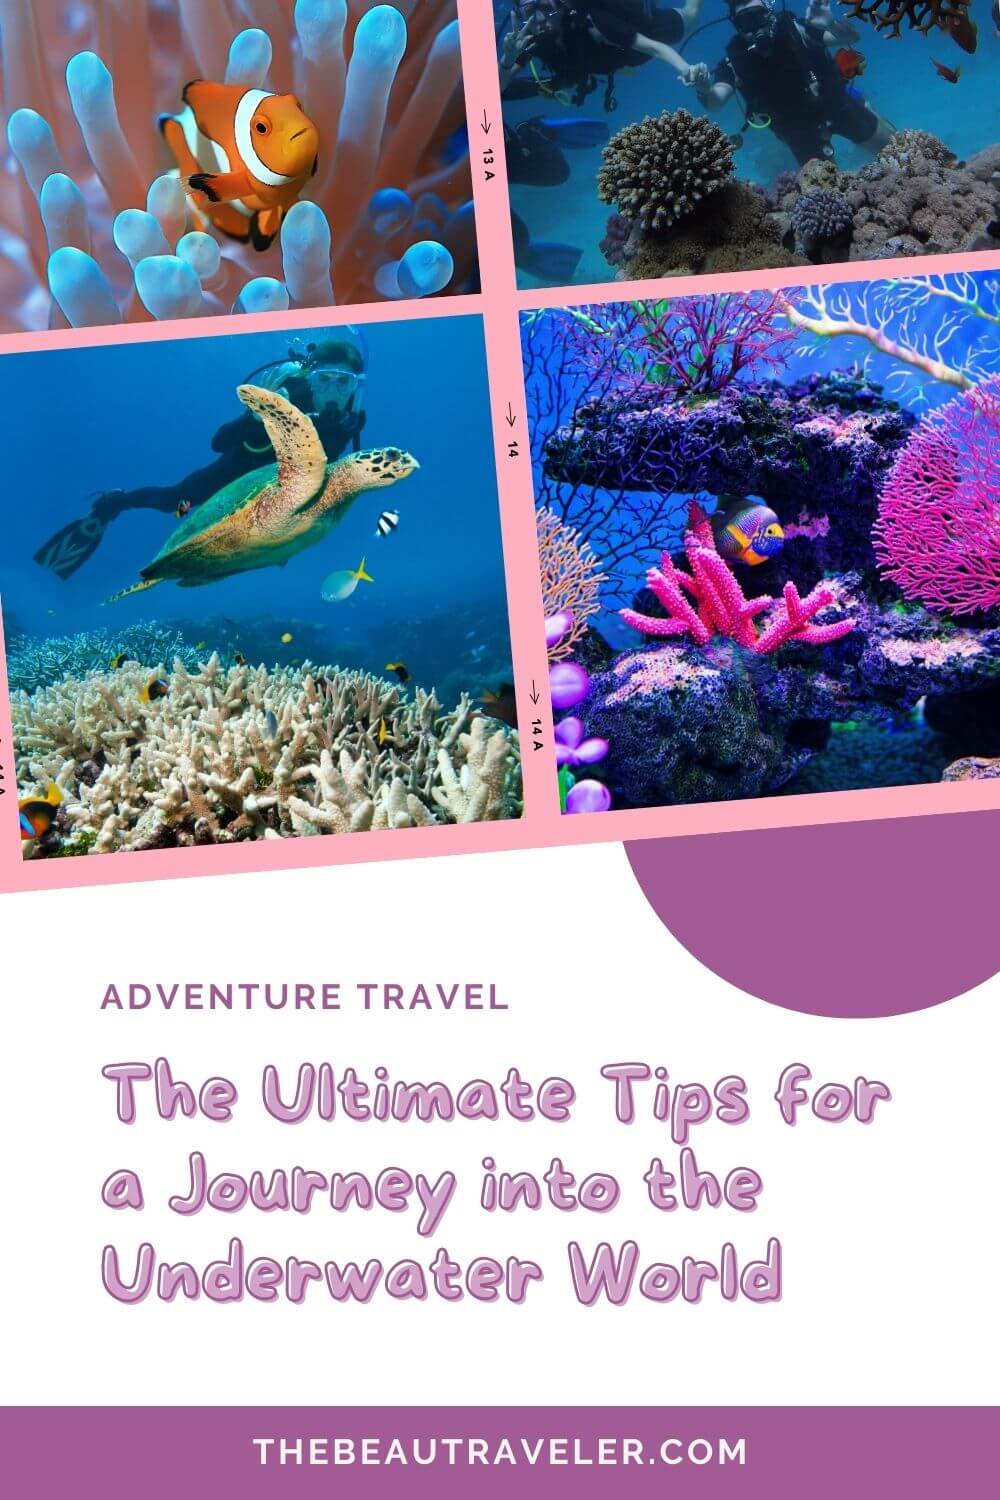 The Ultimate Tips for a Journey into the Underwater World - The BeauTraveler